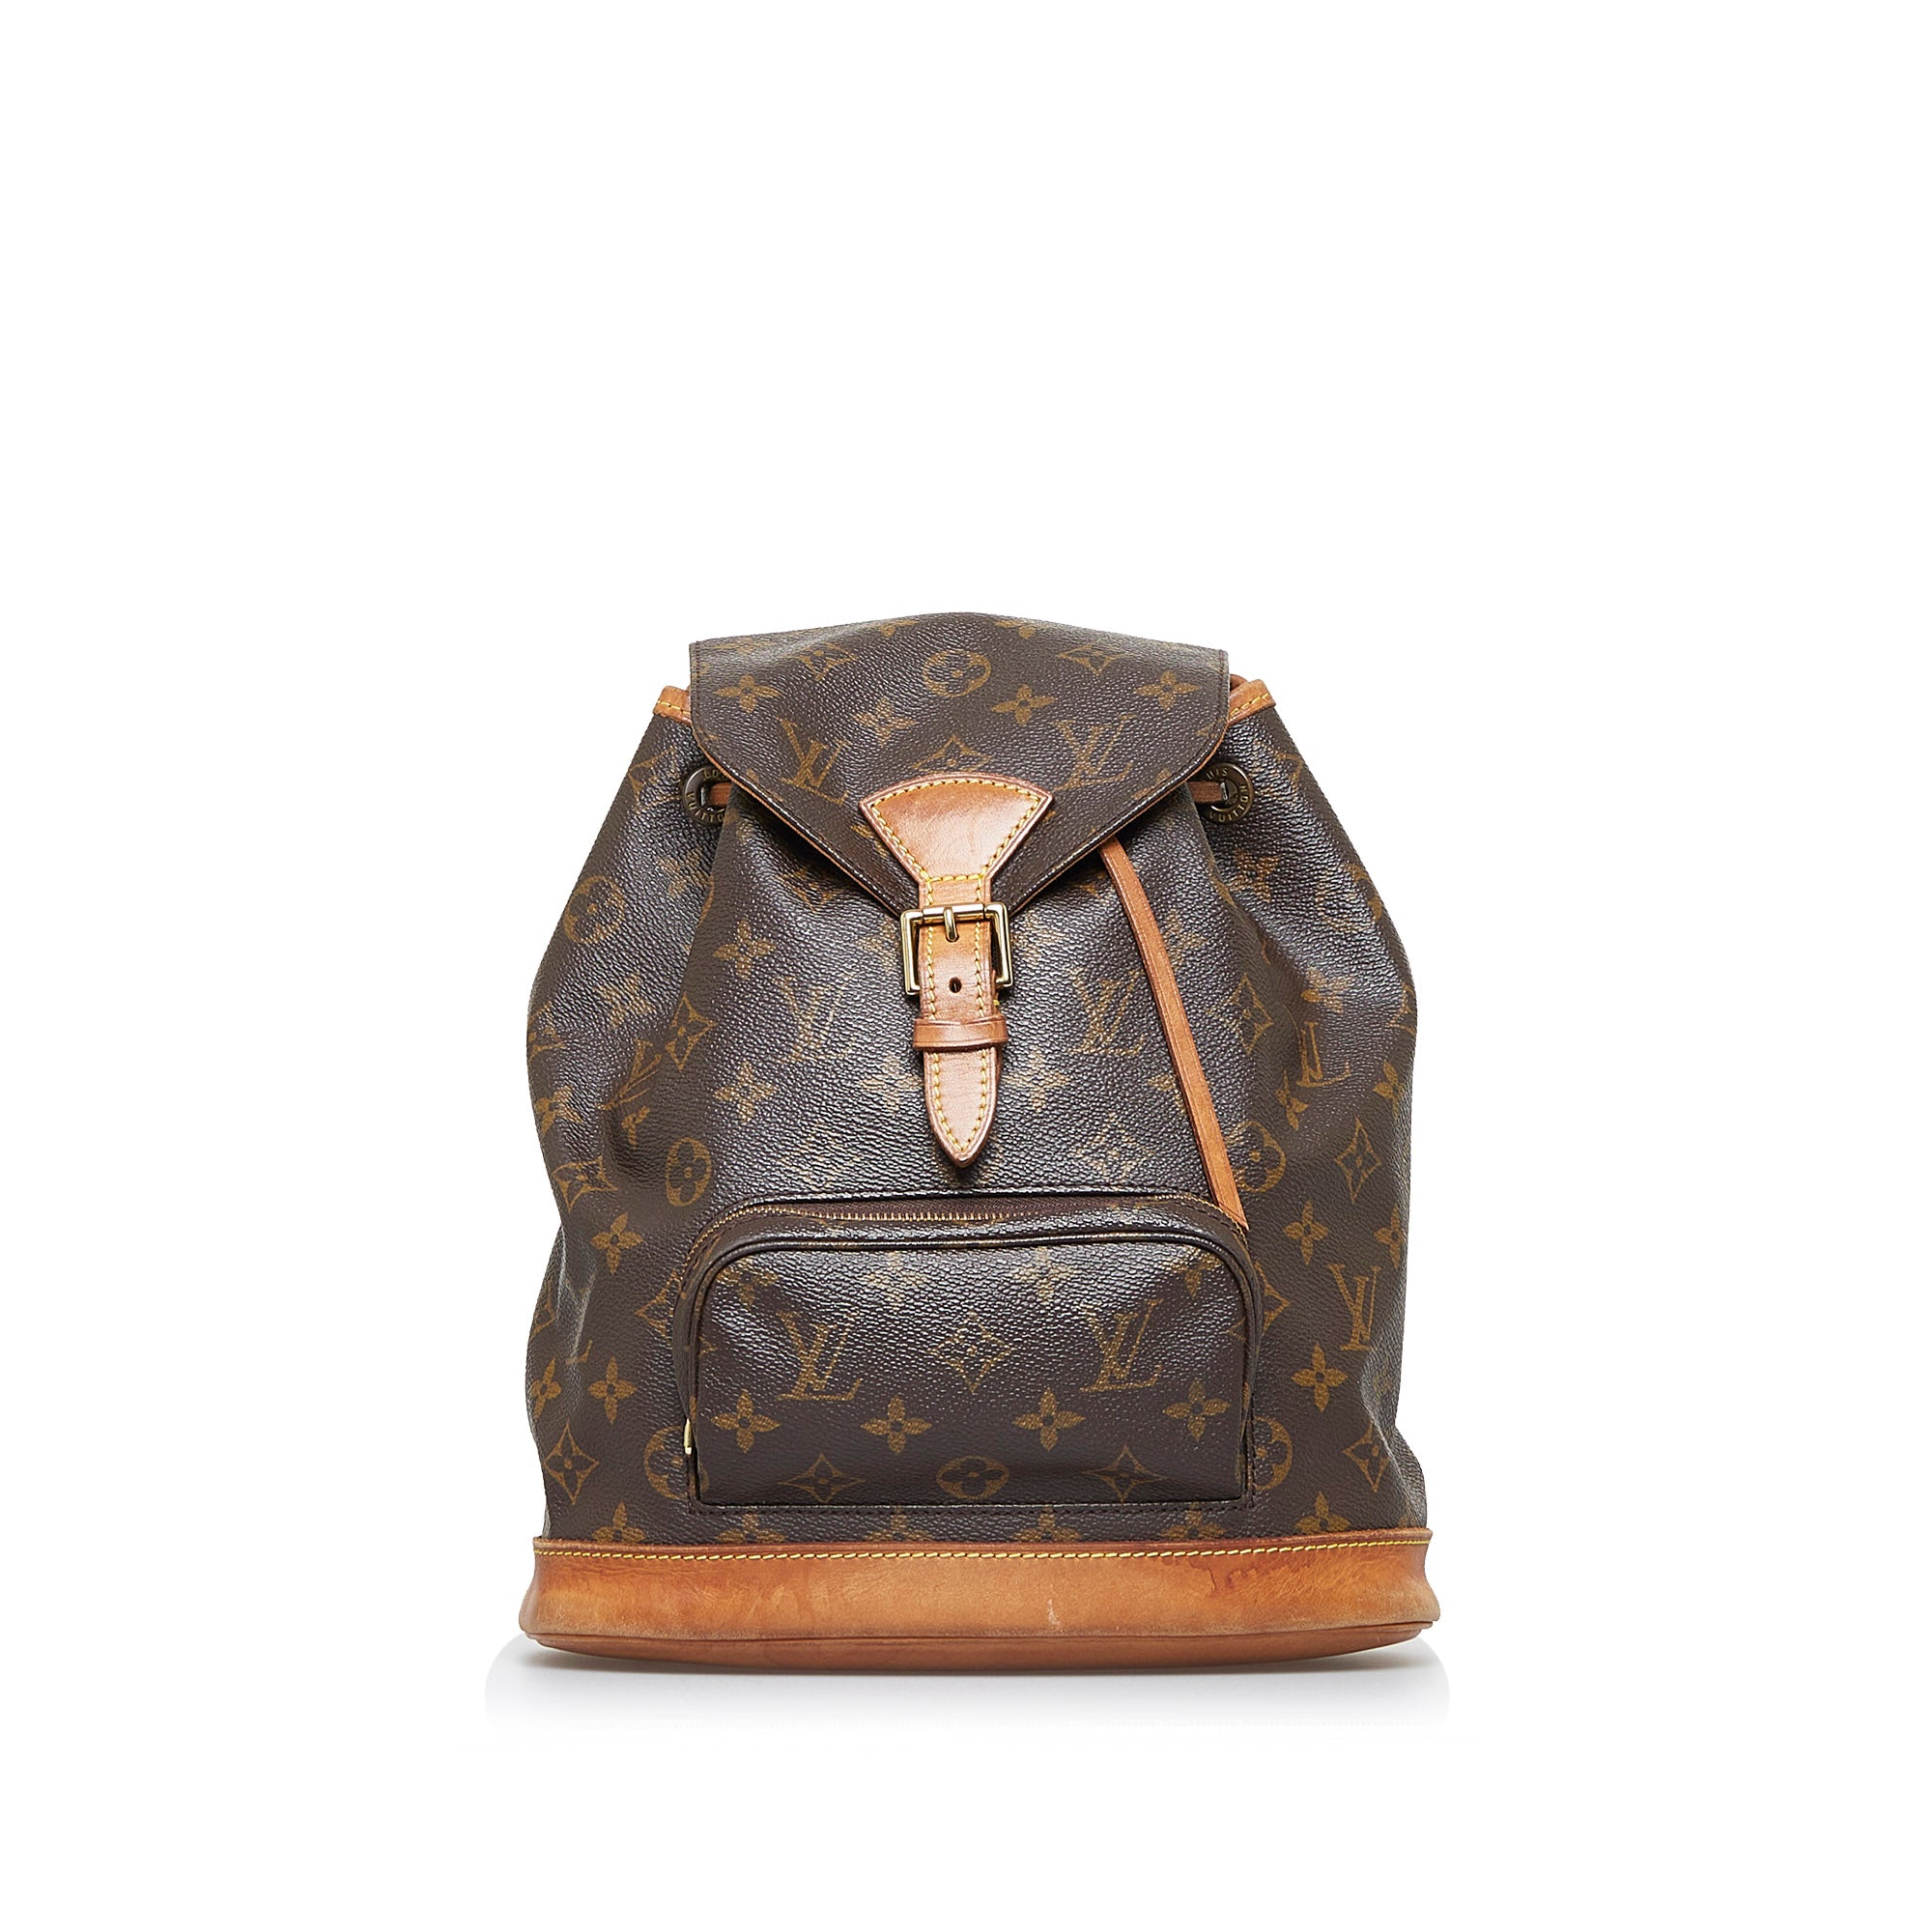 Authentic pre-owned Louis Vuitton montsouris backpack mm